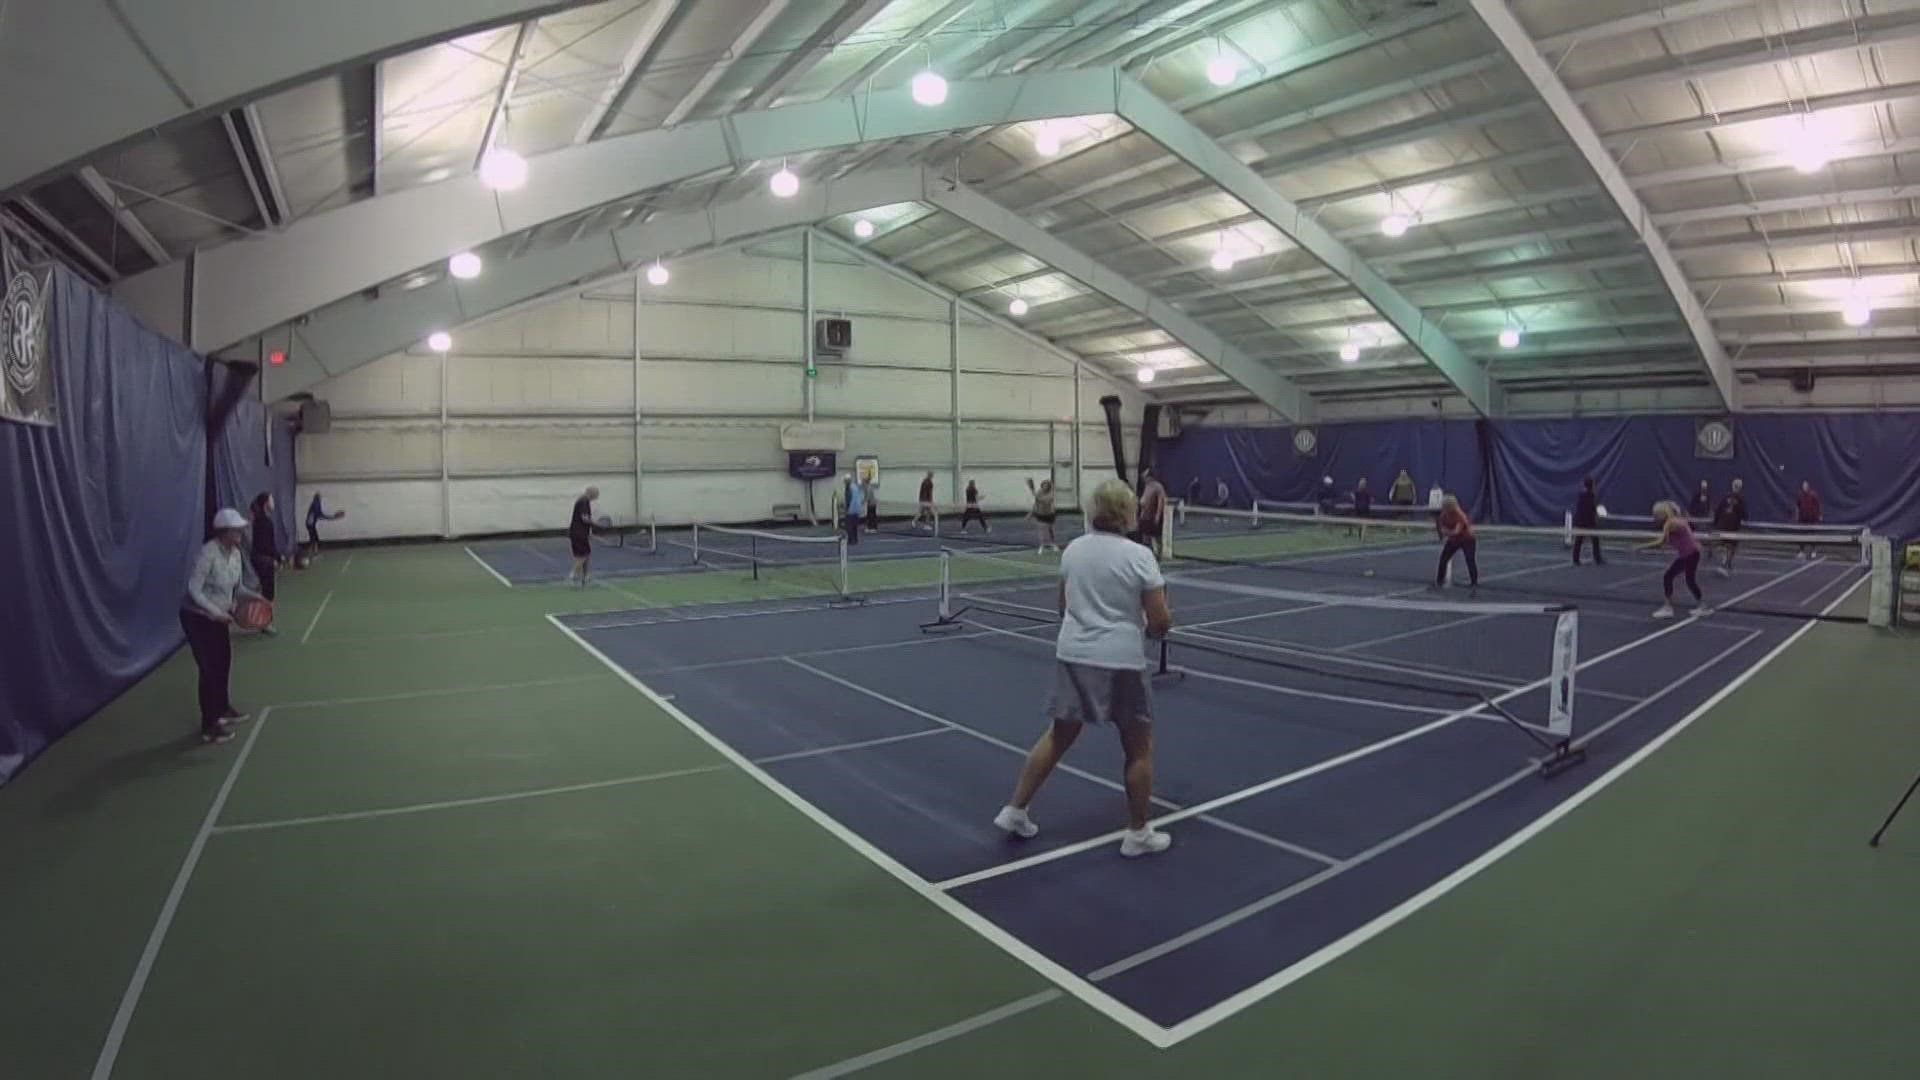 Pickleball is described as a cross between ping pong, badminton, tennis, and table tennis.